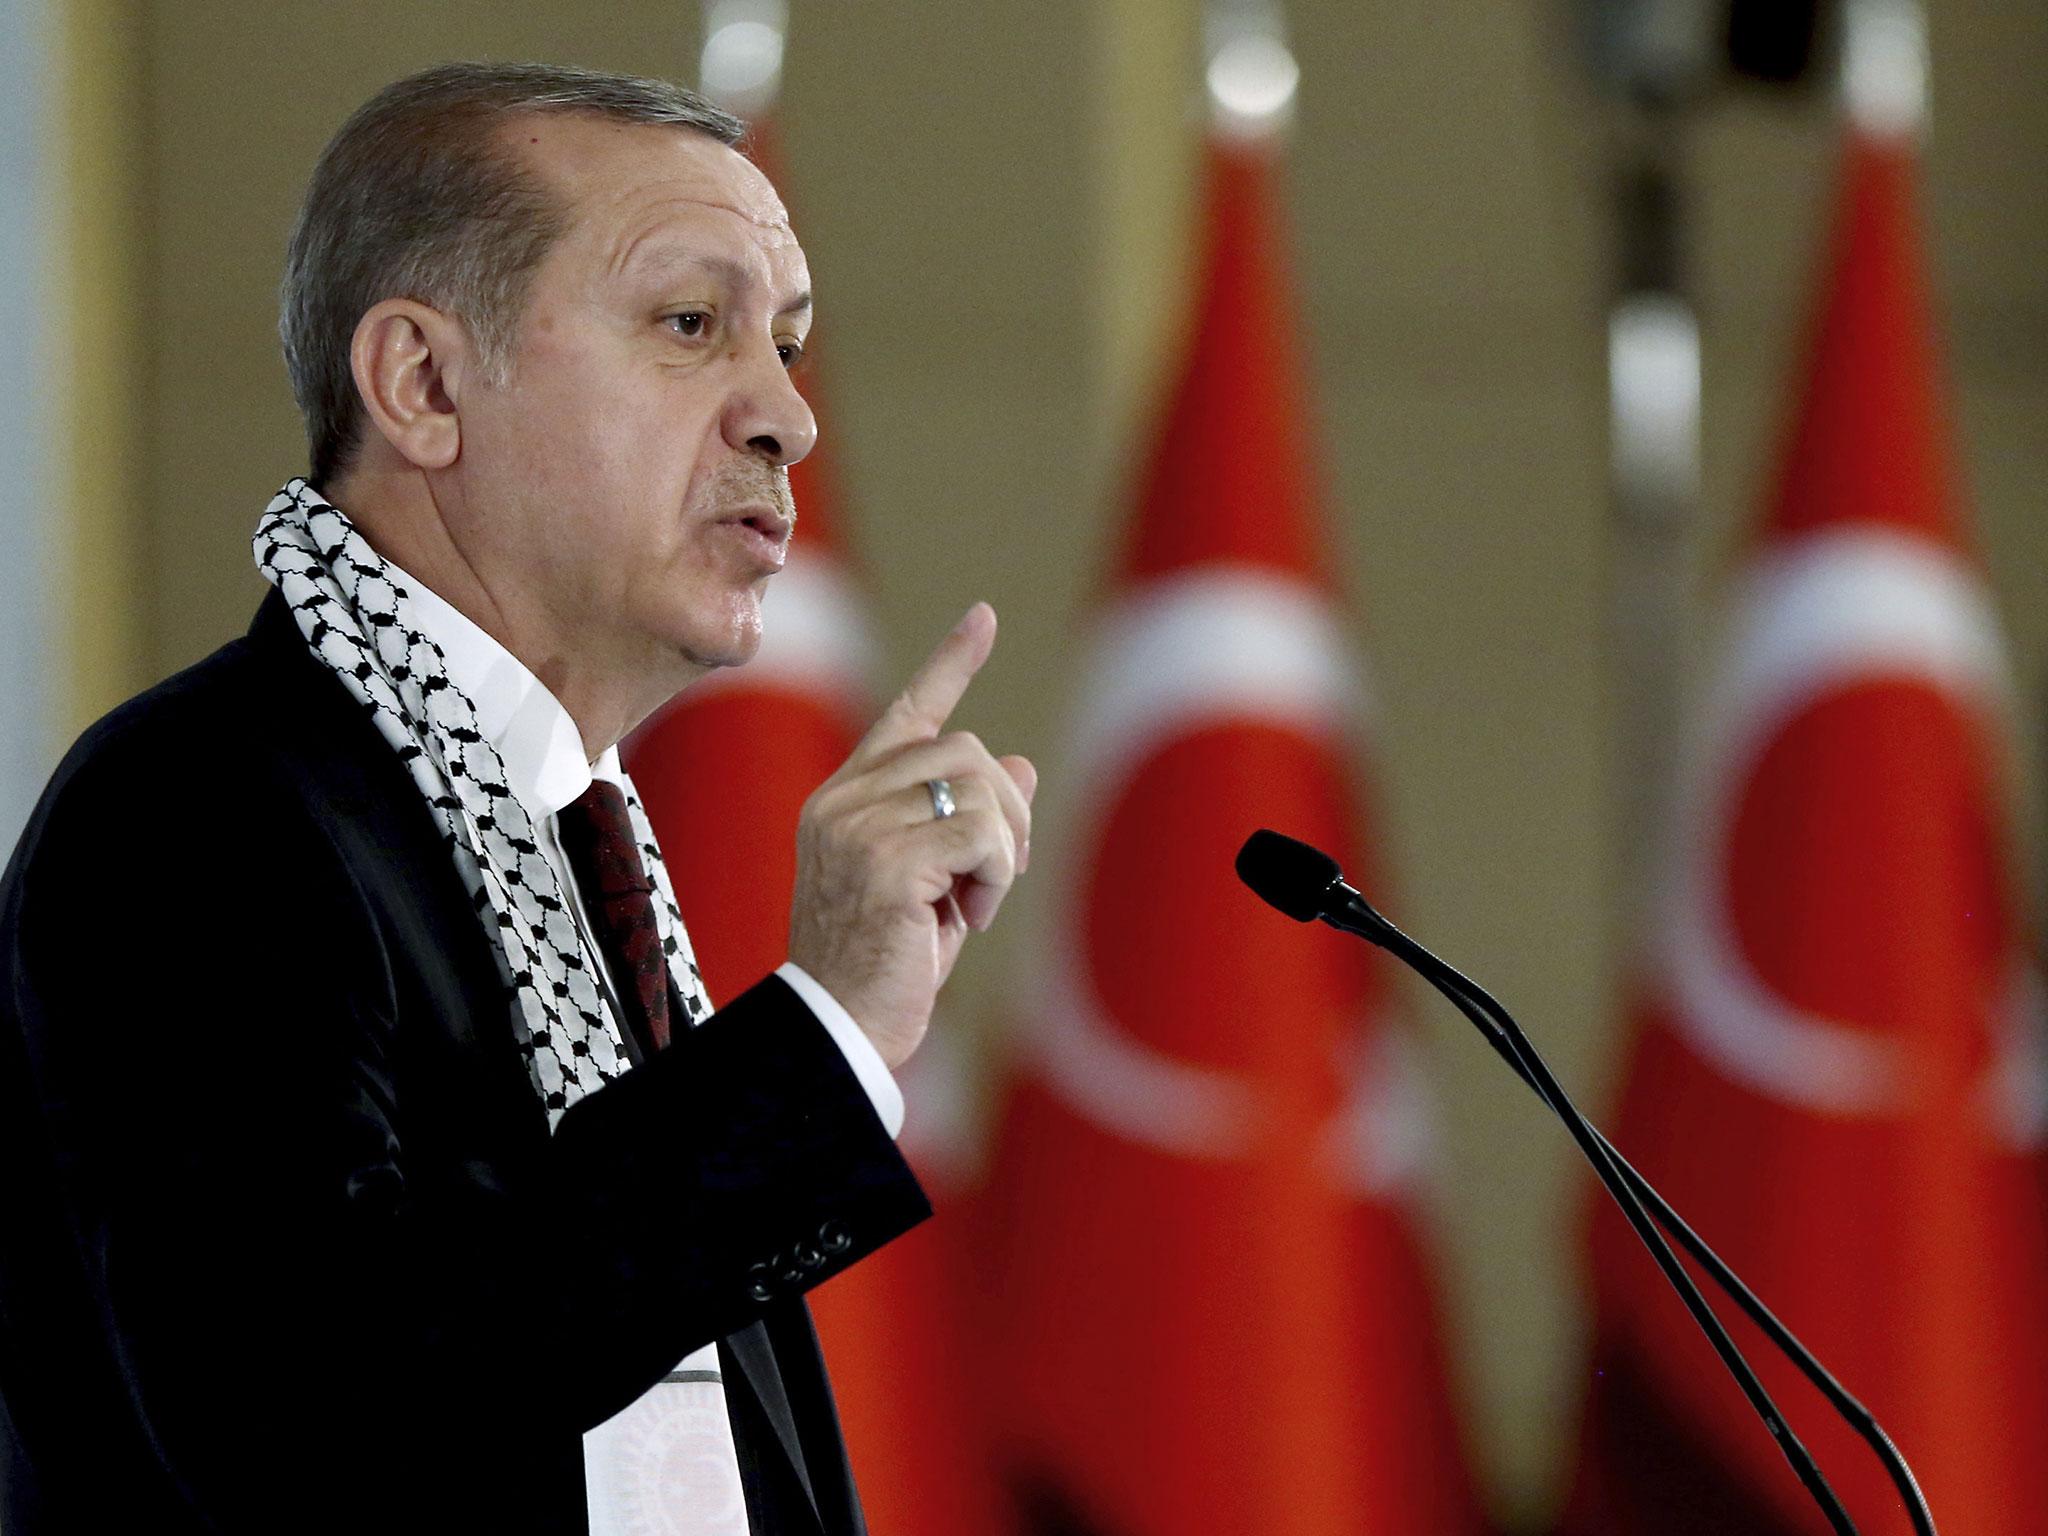 Turkish President Recep Tayyip Erdogan has overseen the detention of thousands of citizens